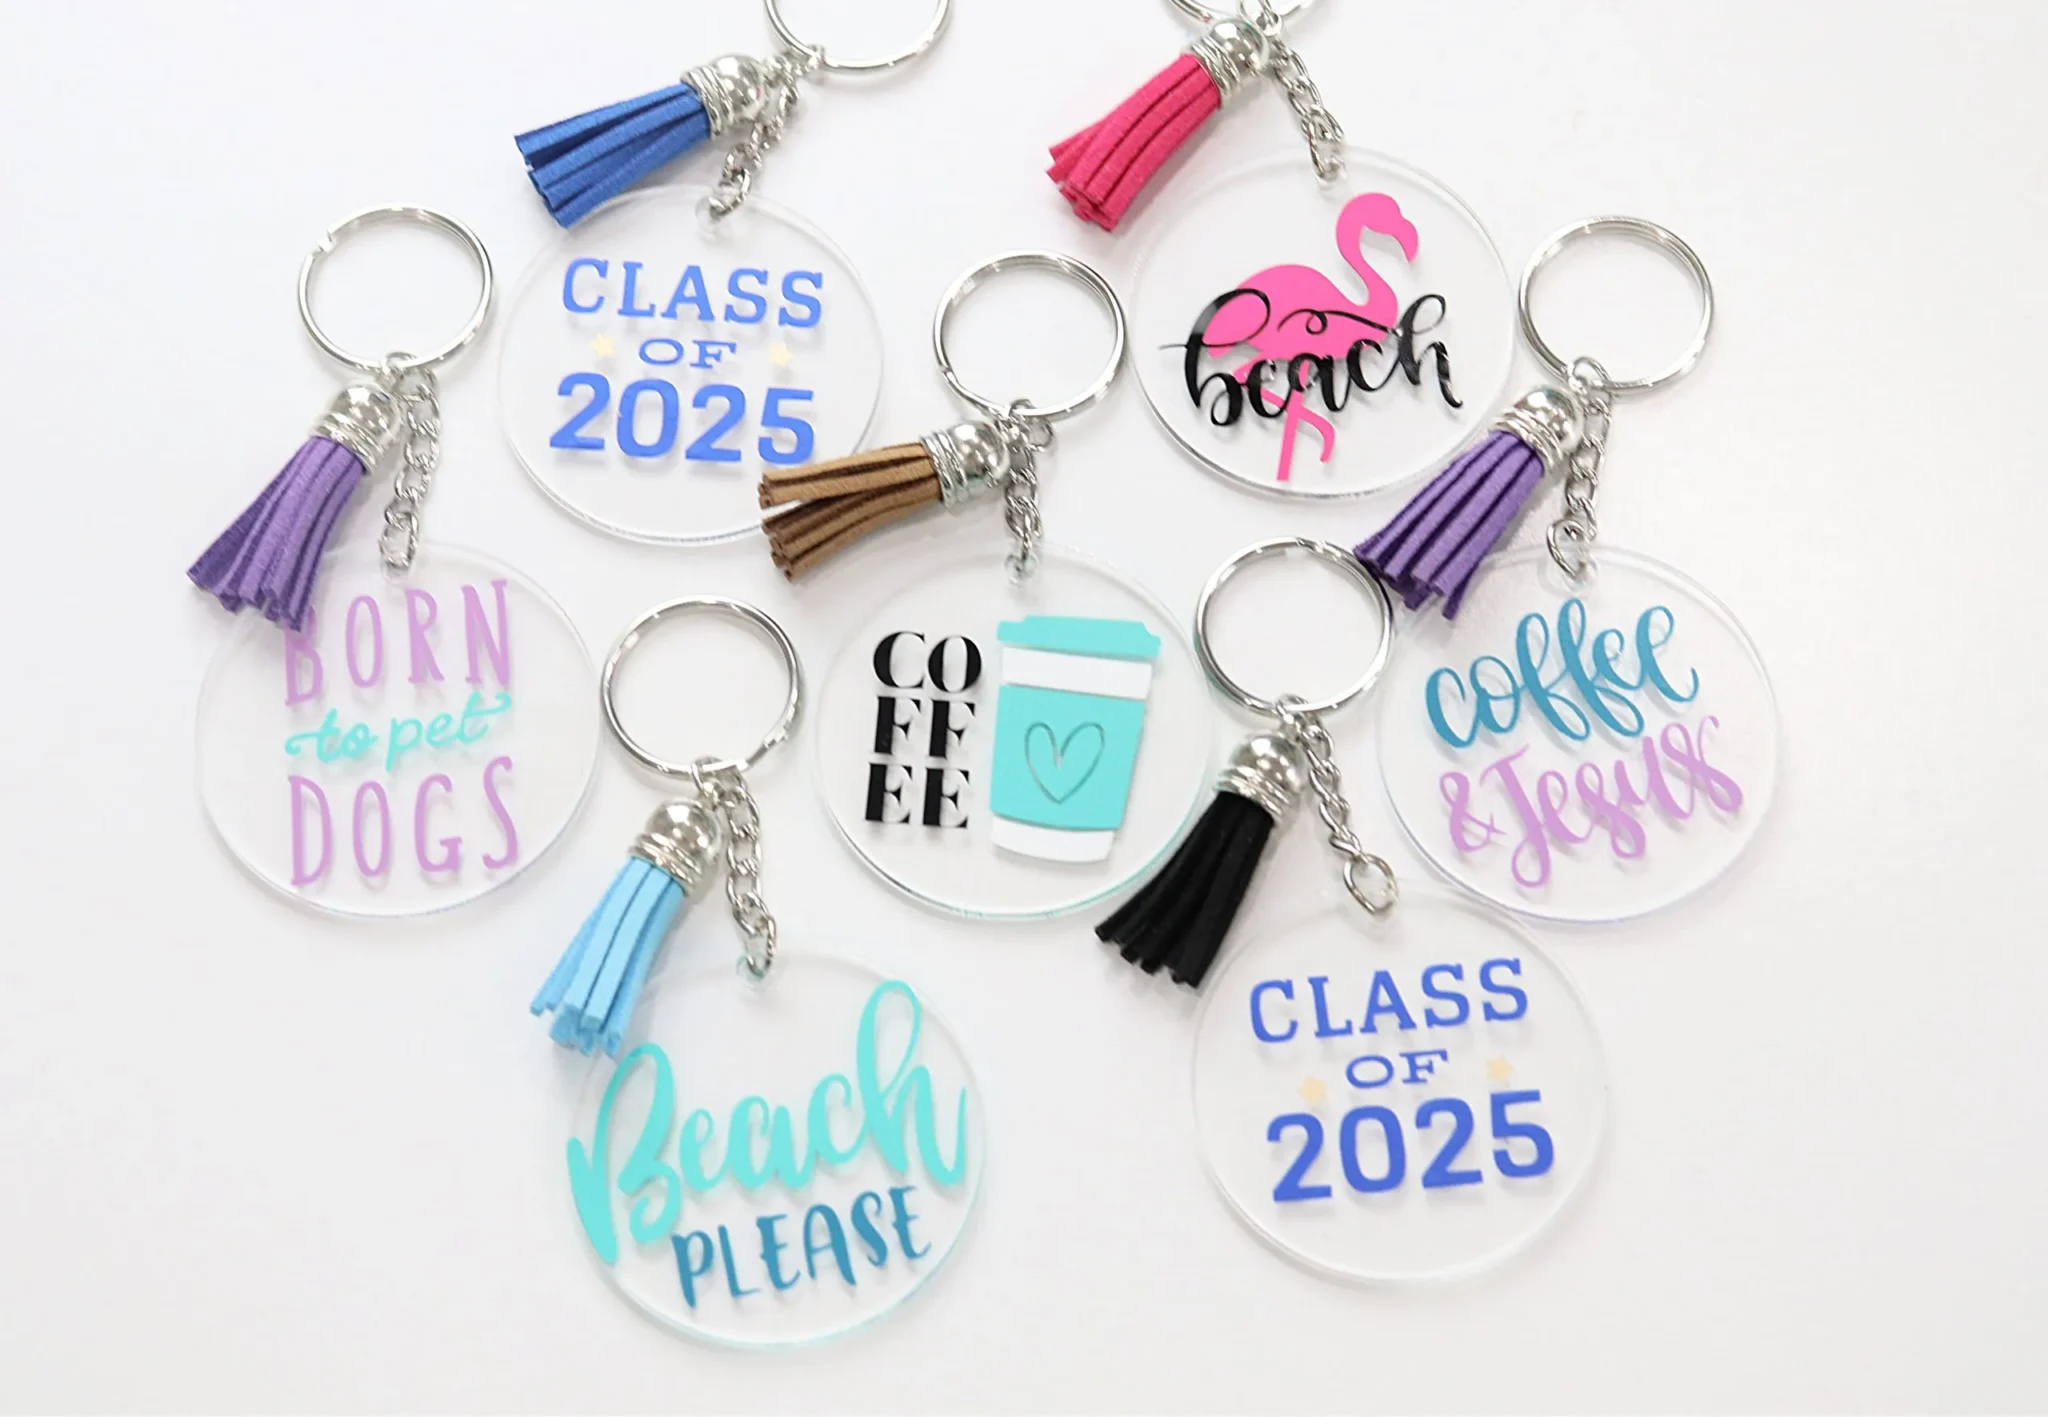 4 Tips for Using Custom Acrylic Keychains in Your Marketing Campaign